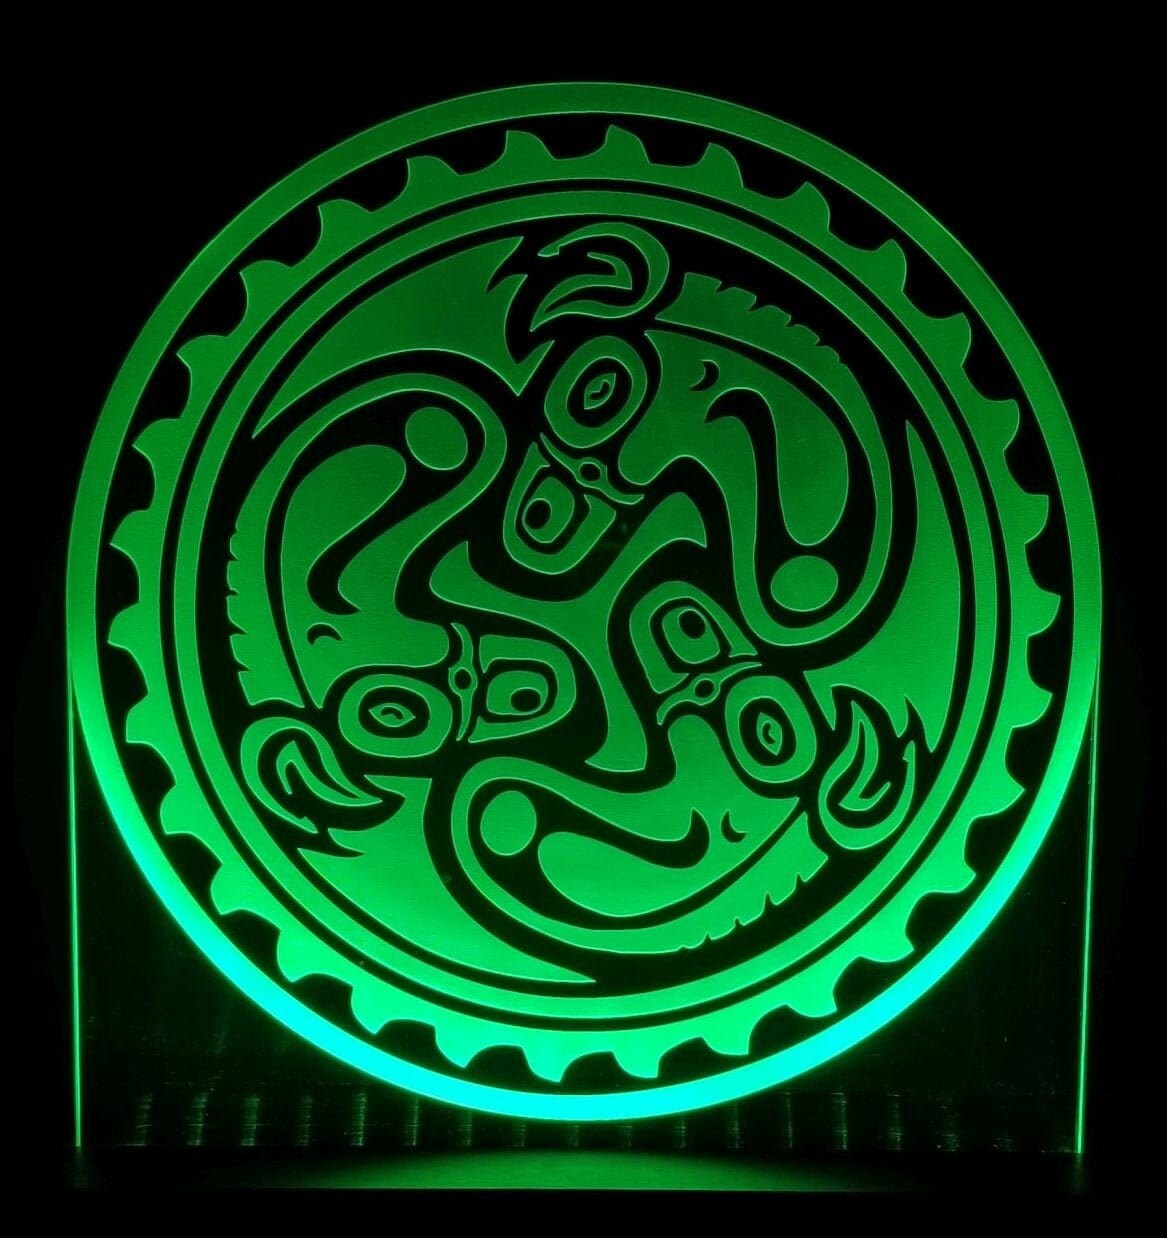 Gov't Mule With 3 Mules LED tabletop light lamp/sign - Neon-like - Free shipping - Made in USA.